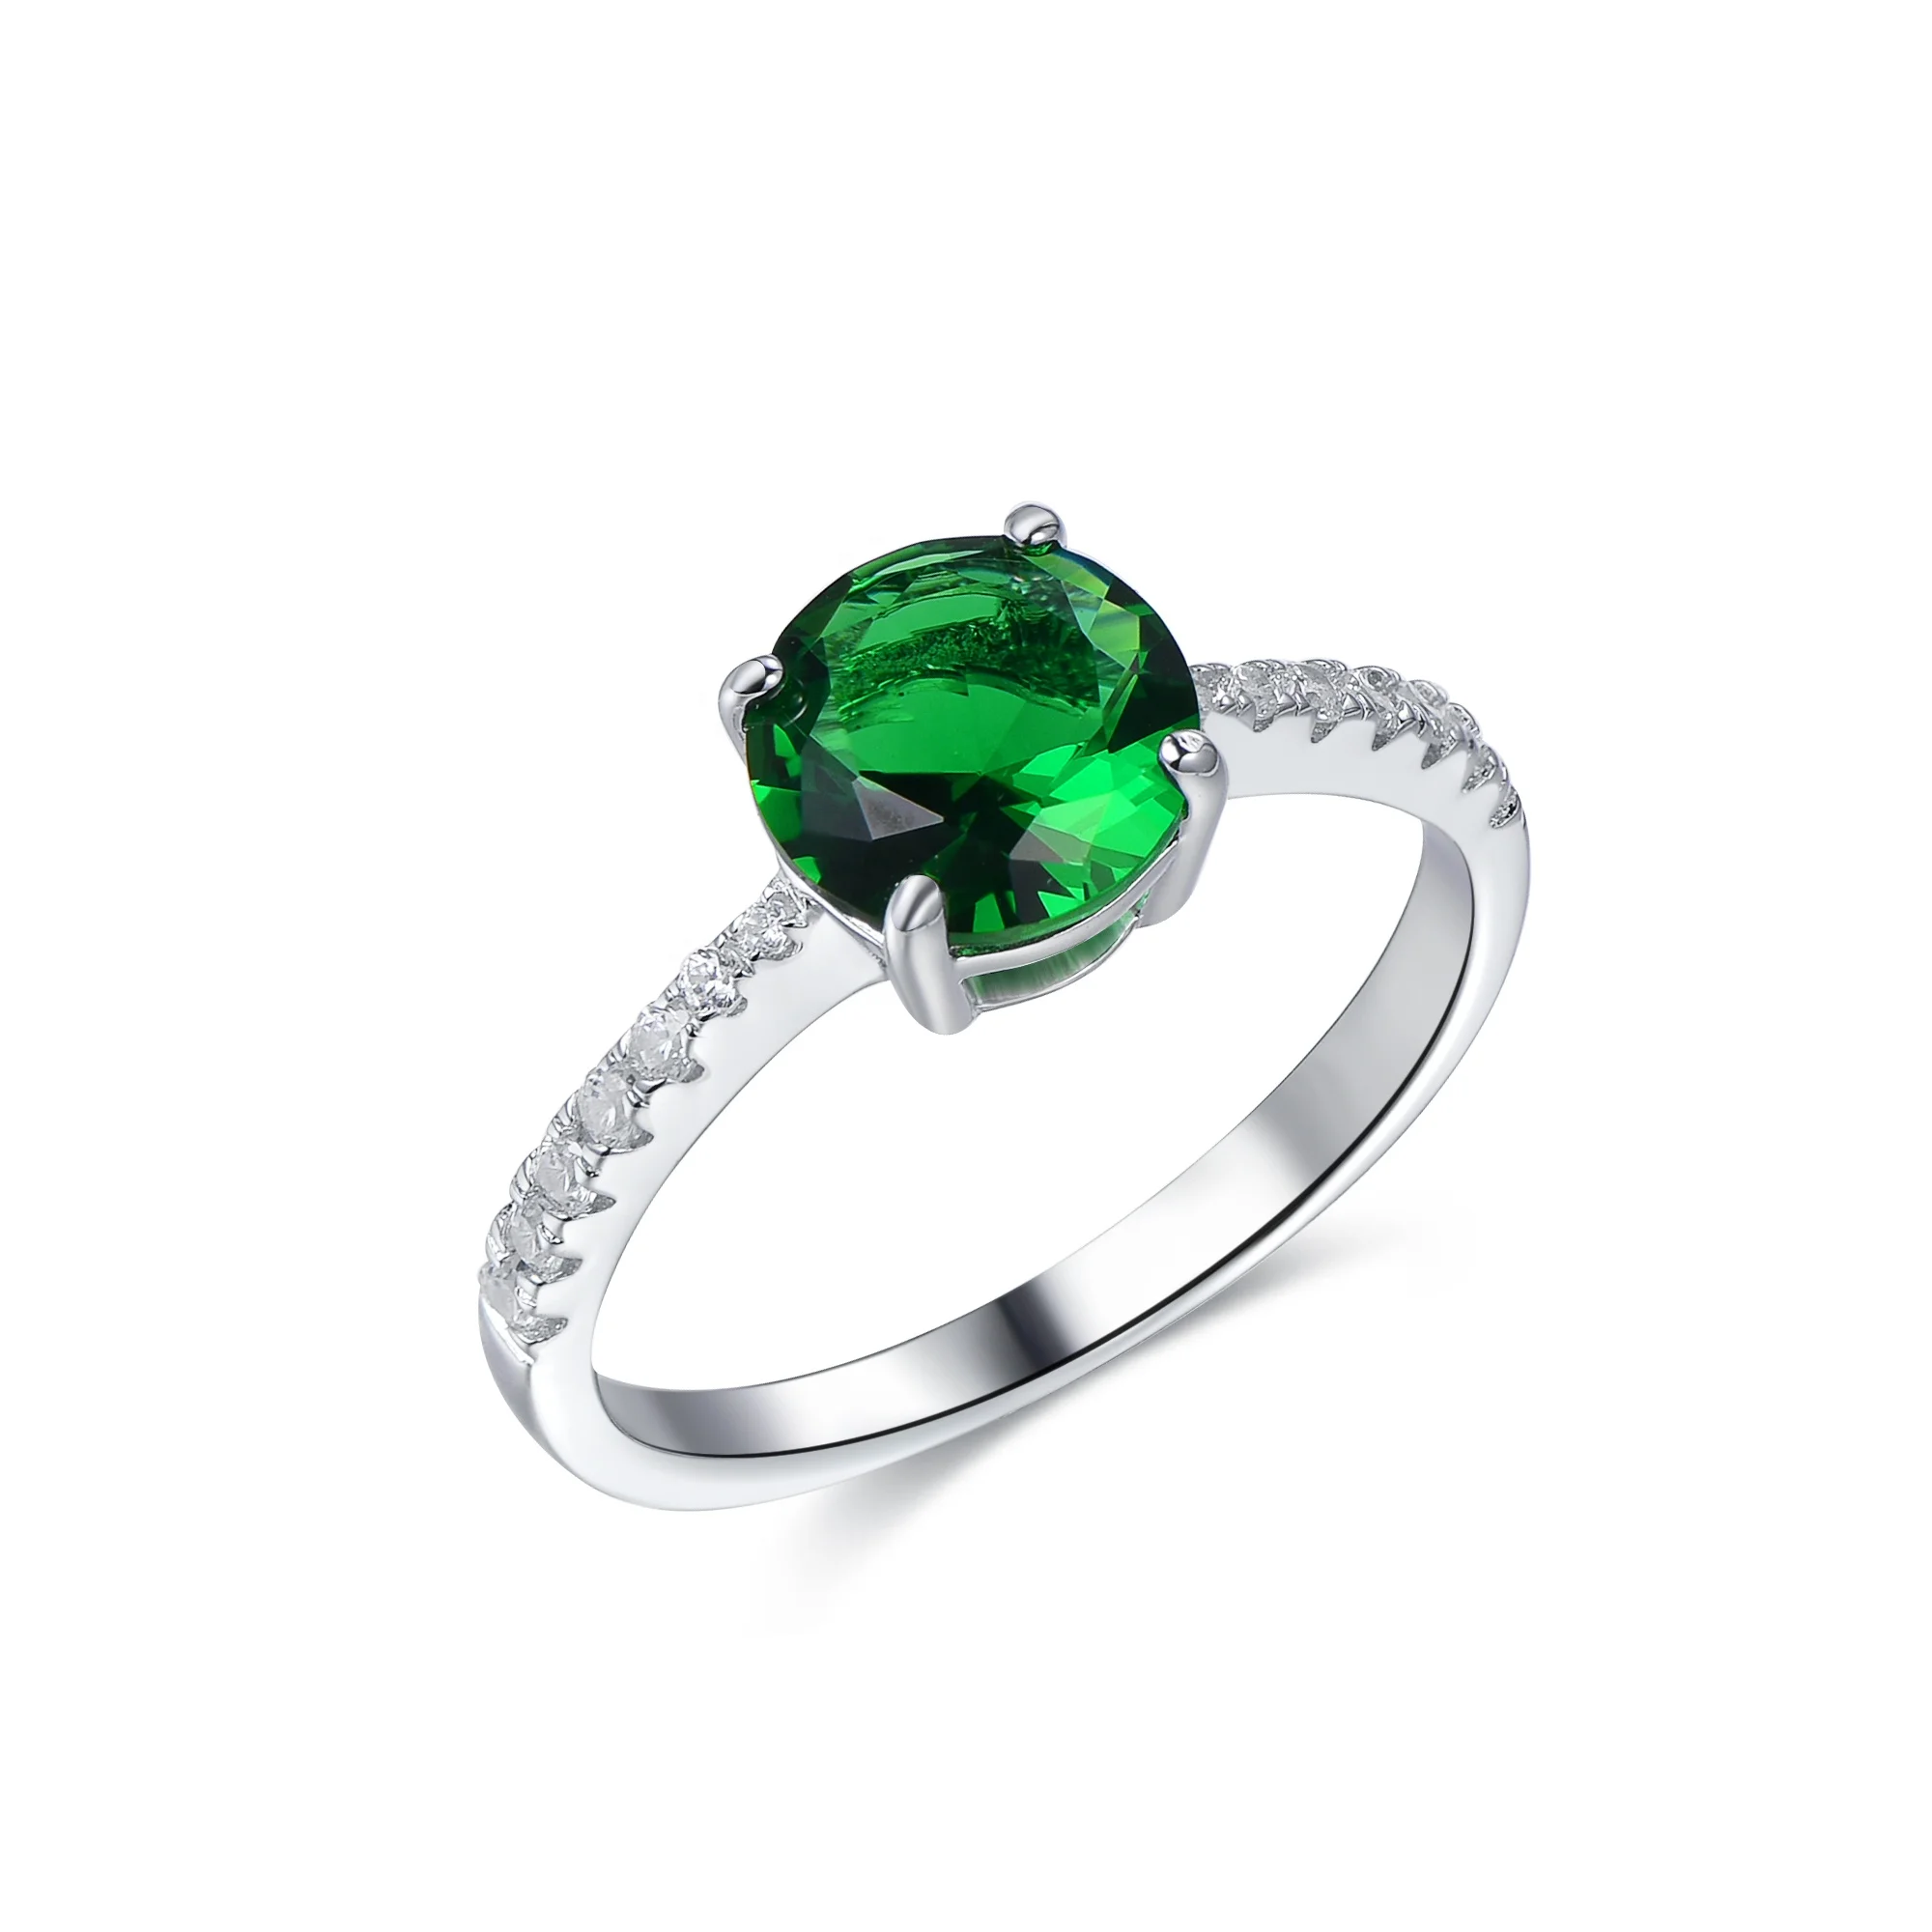 2022 New 925 Sterling Silver Rings Jewellery Micro Prong Emerald Ring Eternity CZ Stone Bands Ring